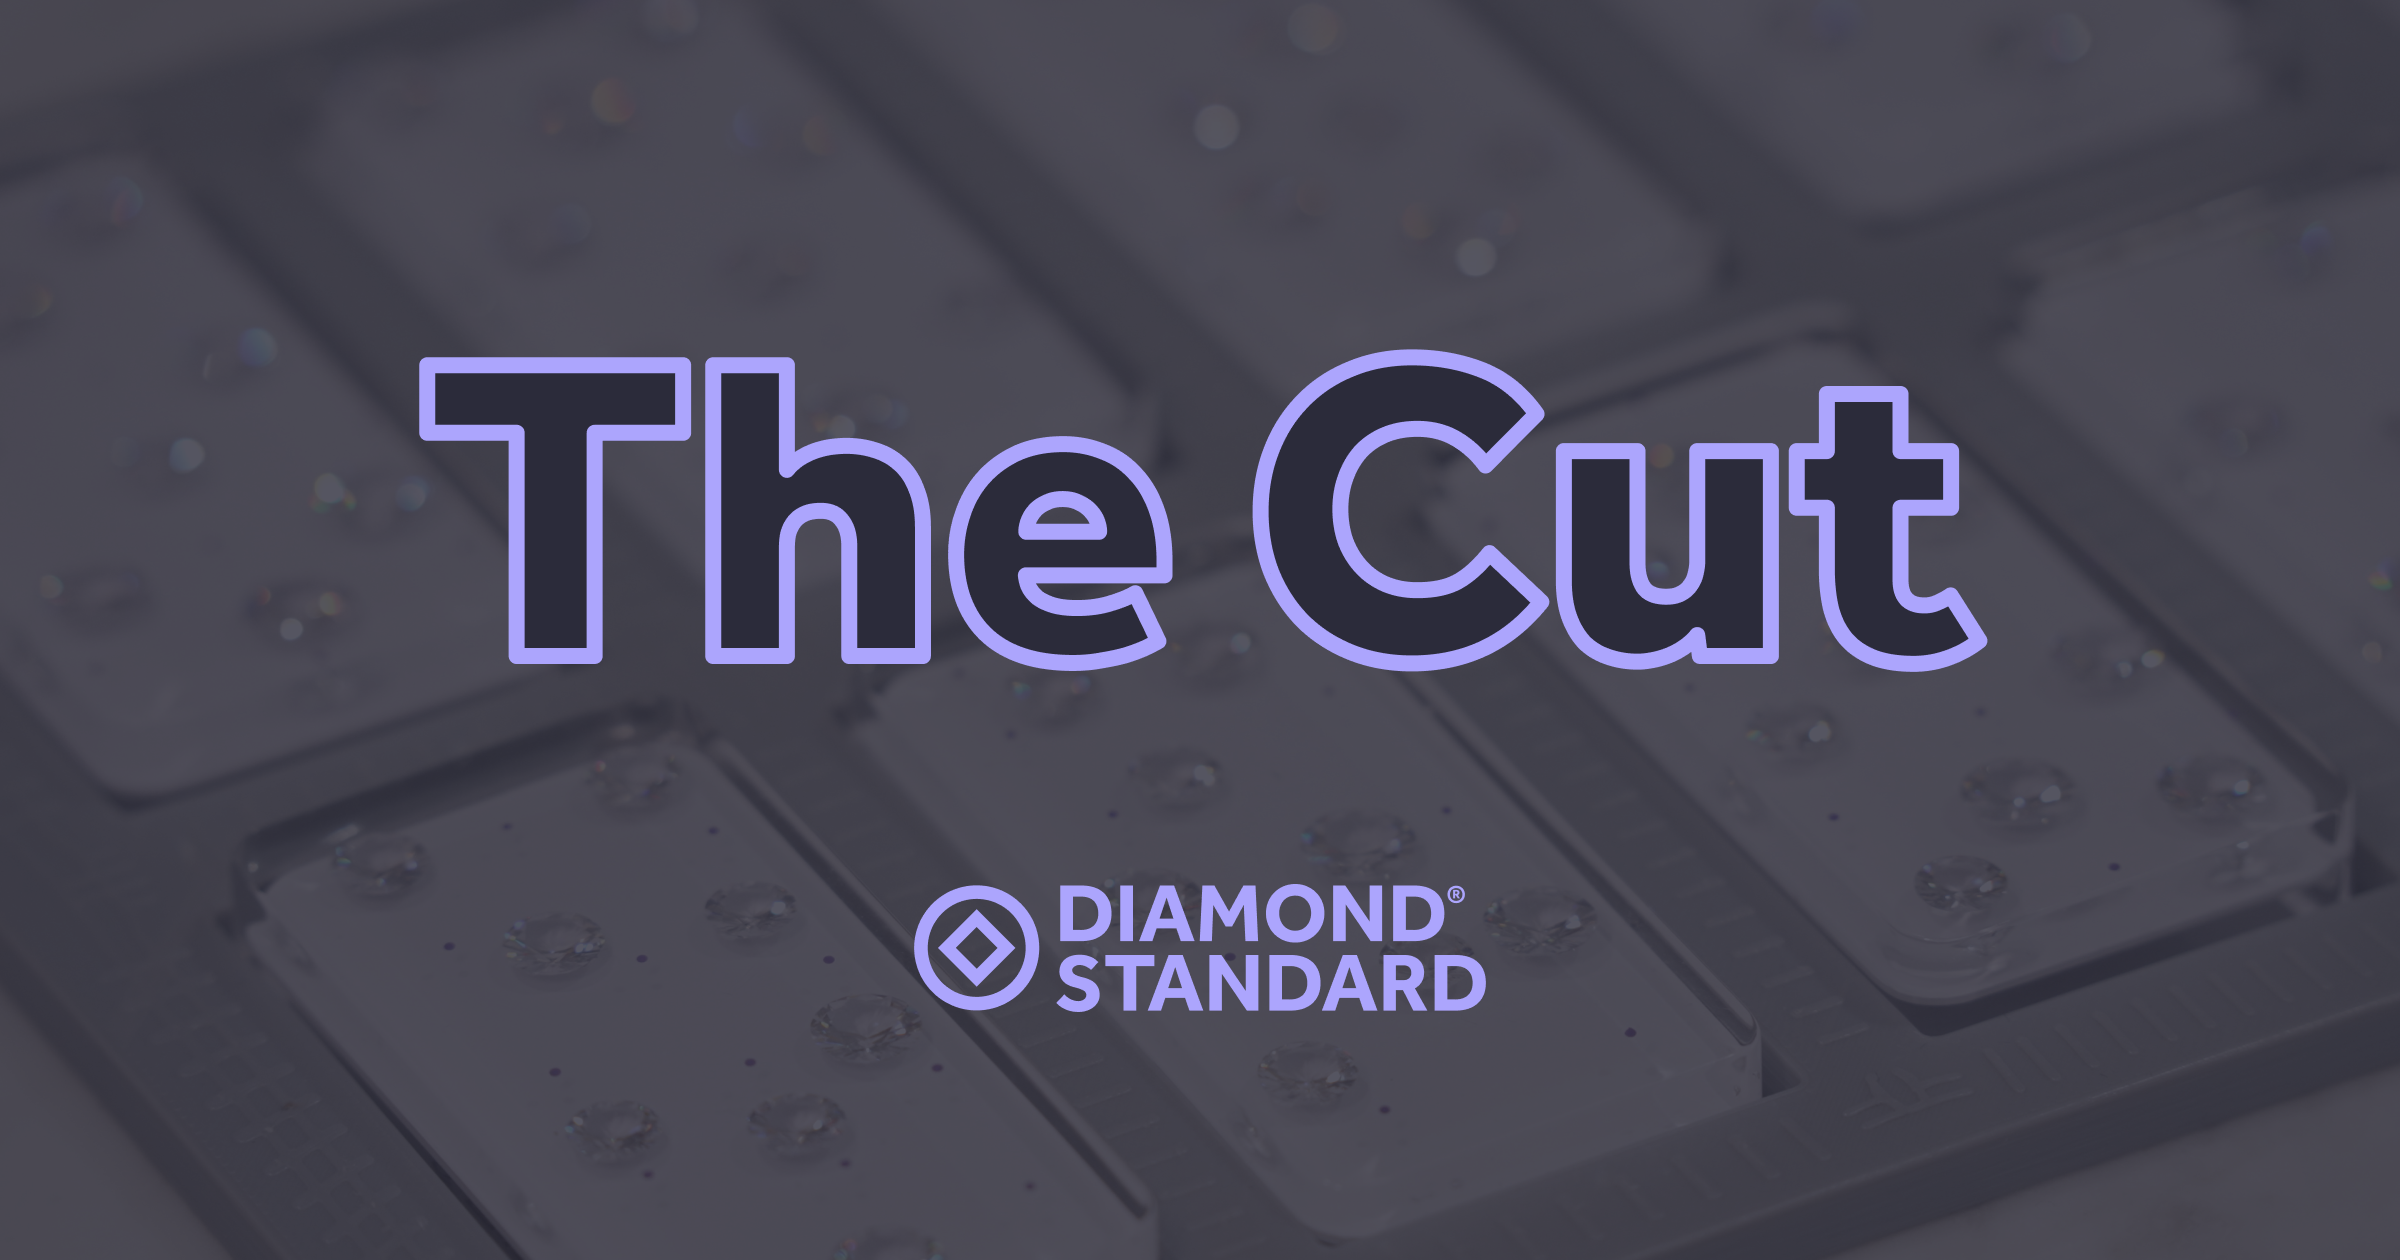 Welcome to The Cut